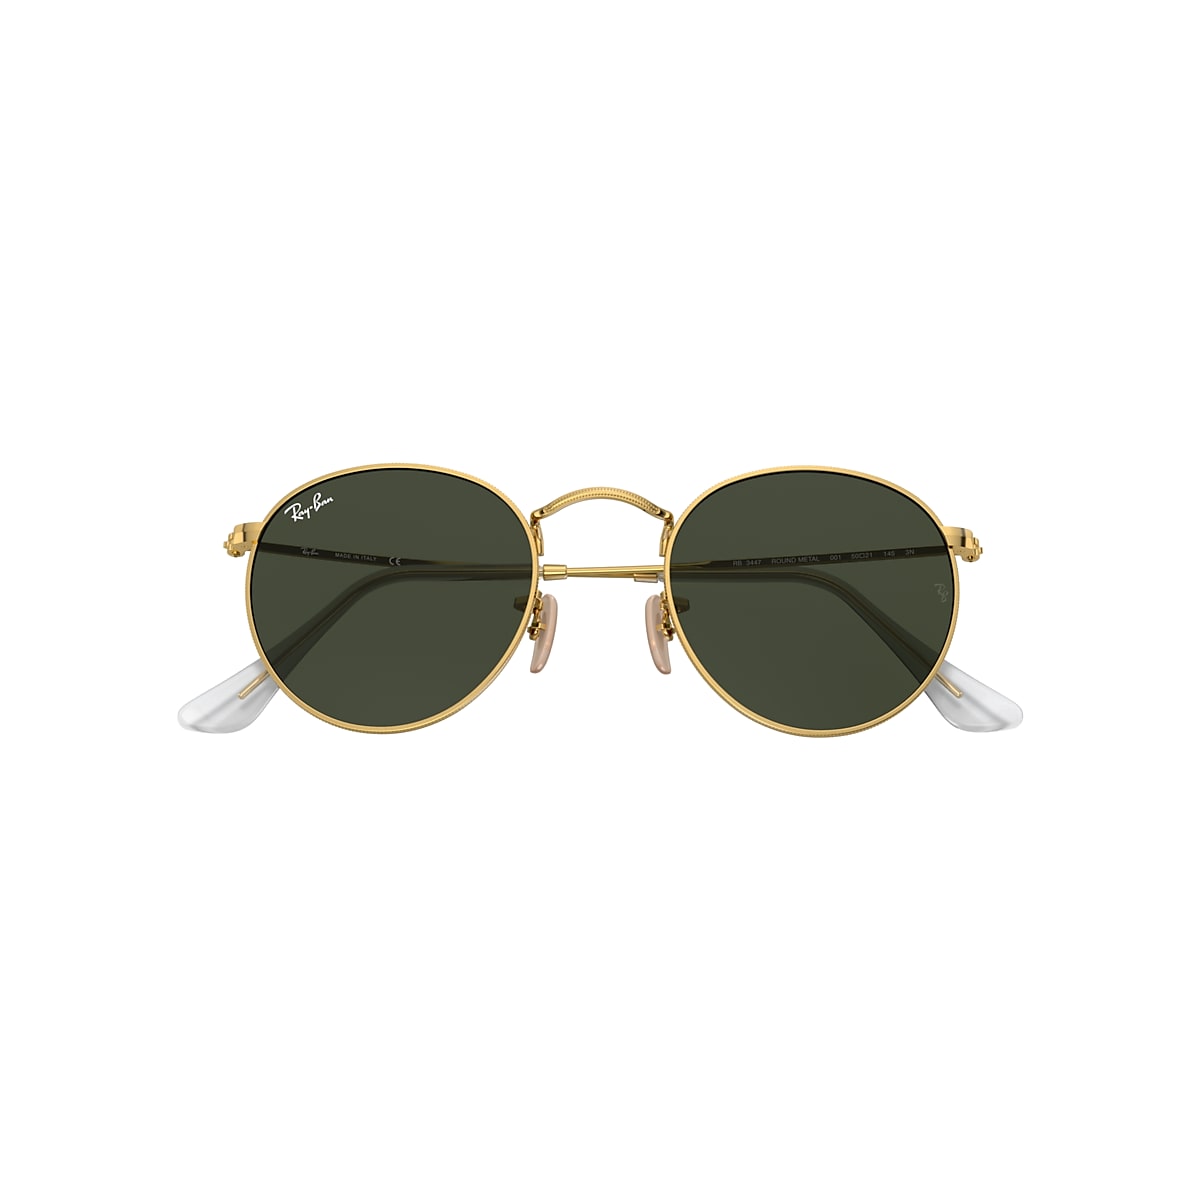 RAY-BAN RB3447 Gold - Male Sunglasses, Green Lens